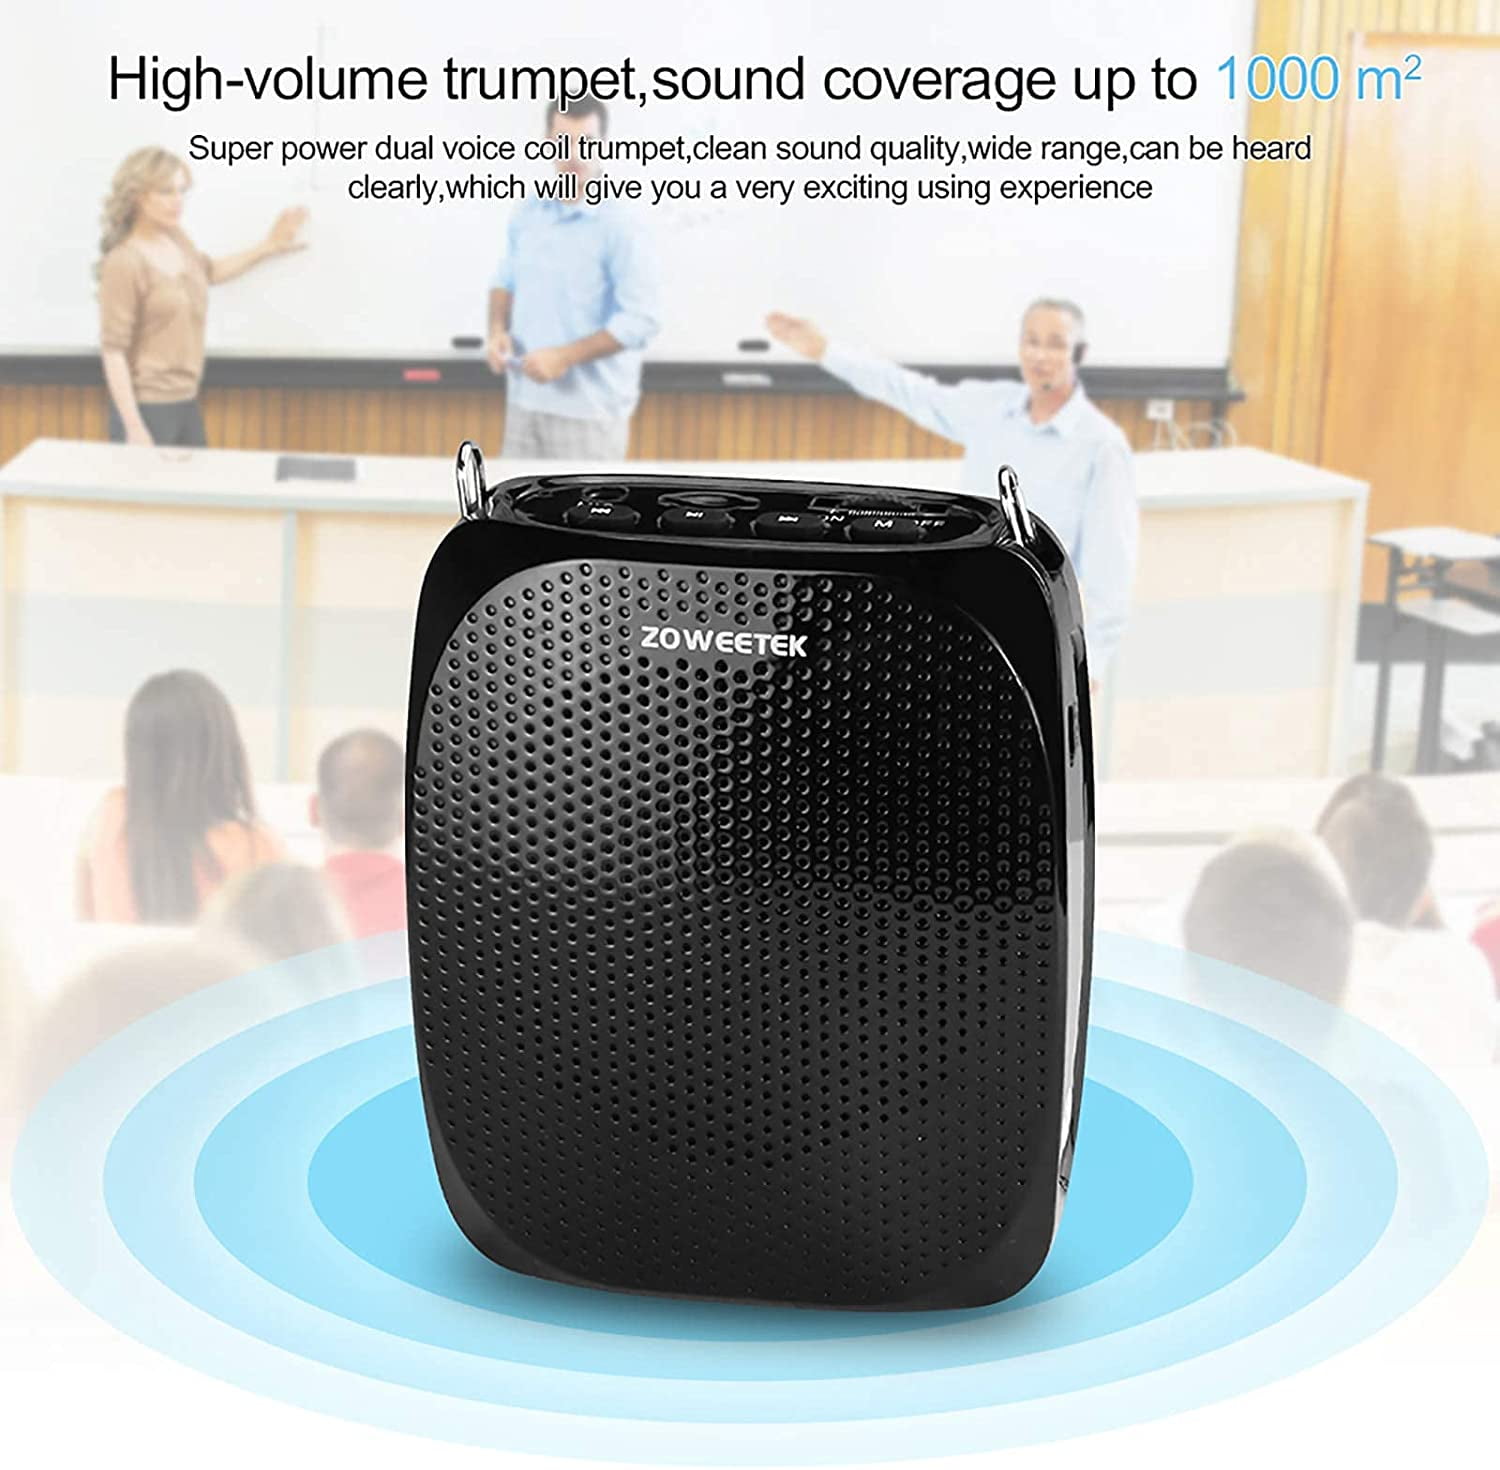 SHIDU Wireless Voice Amplifier For Teachers Promotions and Outdoors Meeting Bluetooth Loudspeaker With Two Microphones,Portable Rechargeable PA System -25W For Classroom 